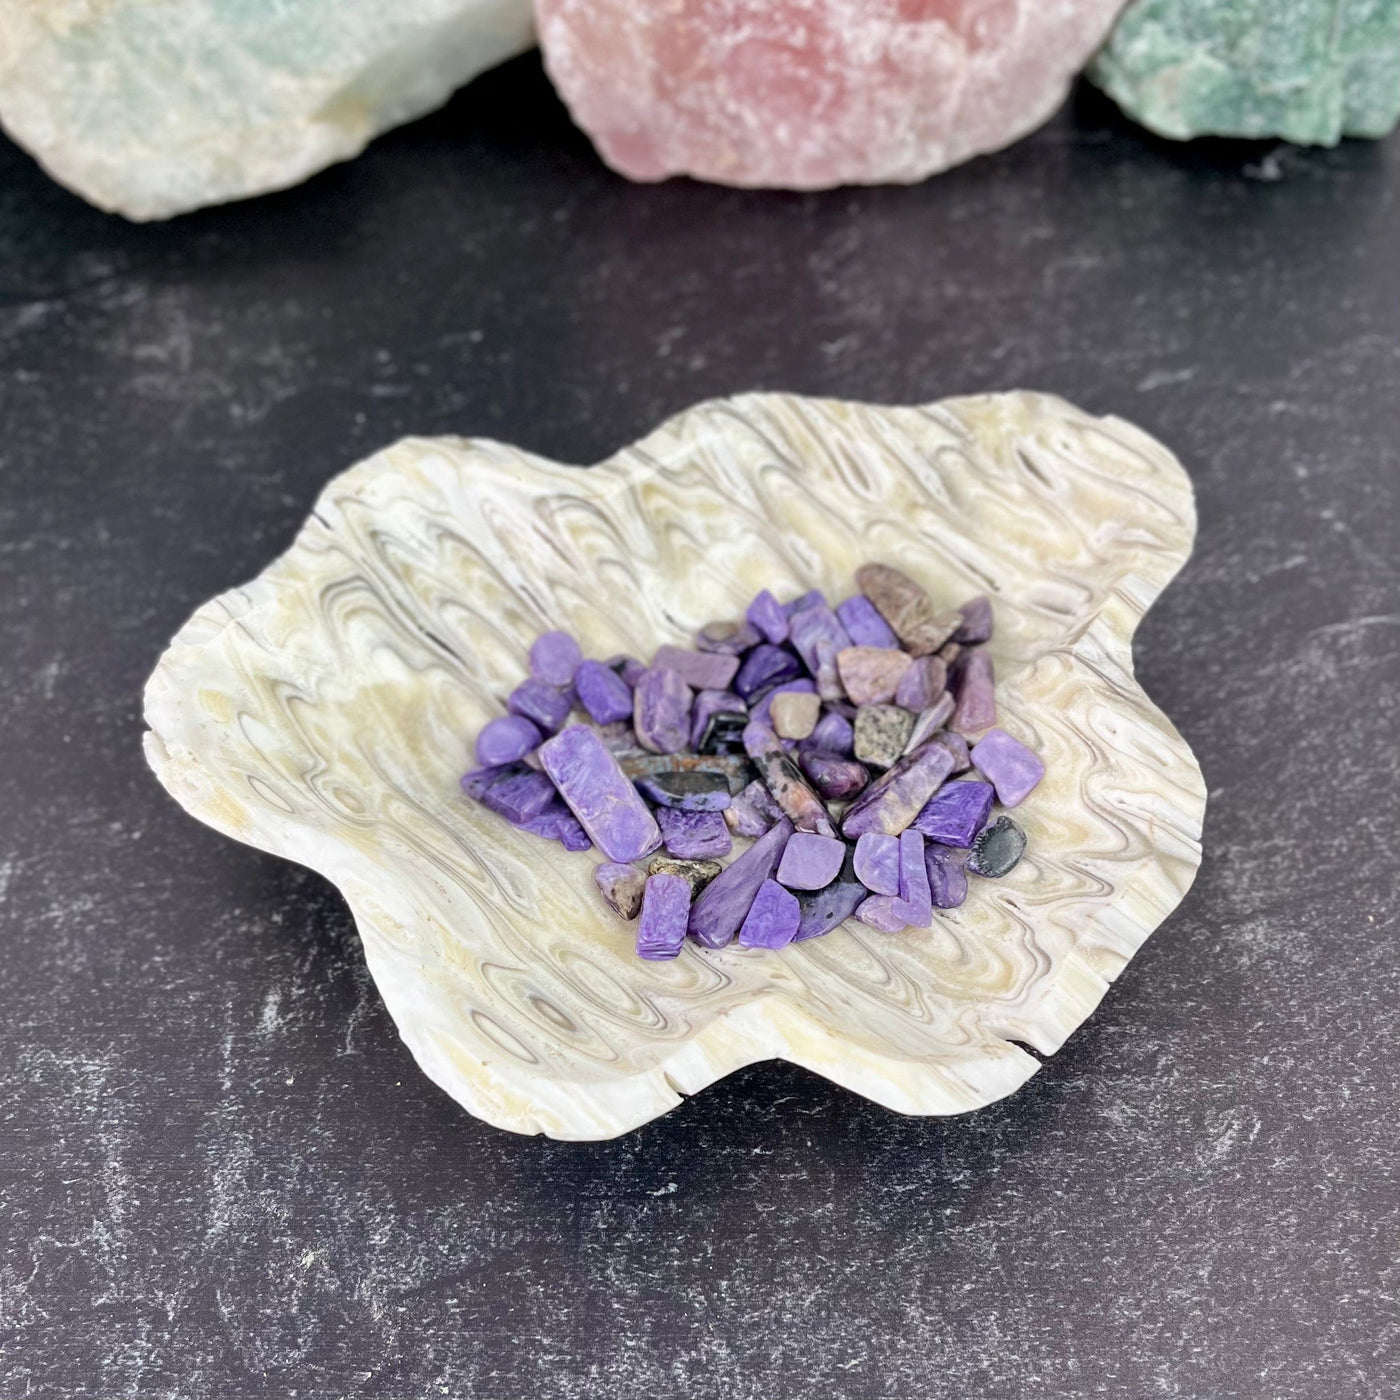 Mexican Patterned Onyx Freeform Bowl pictured with tiny amethysts inside (not included)